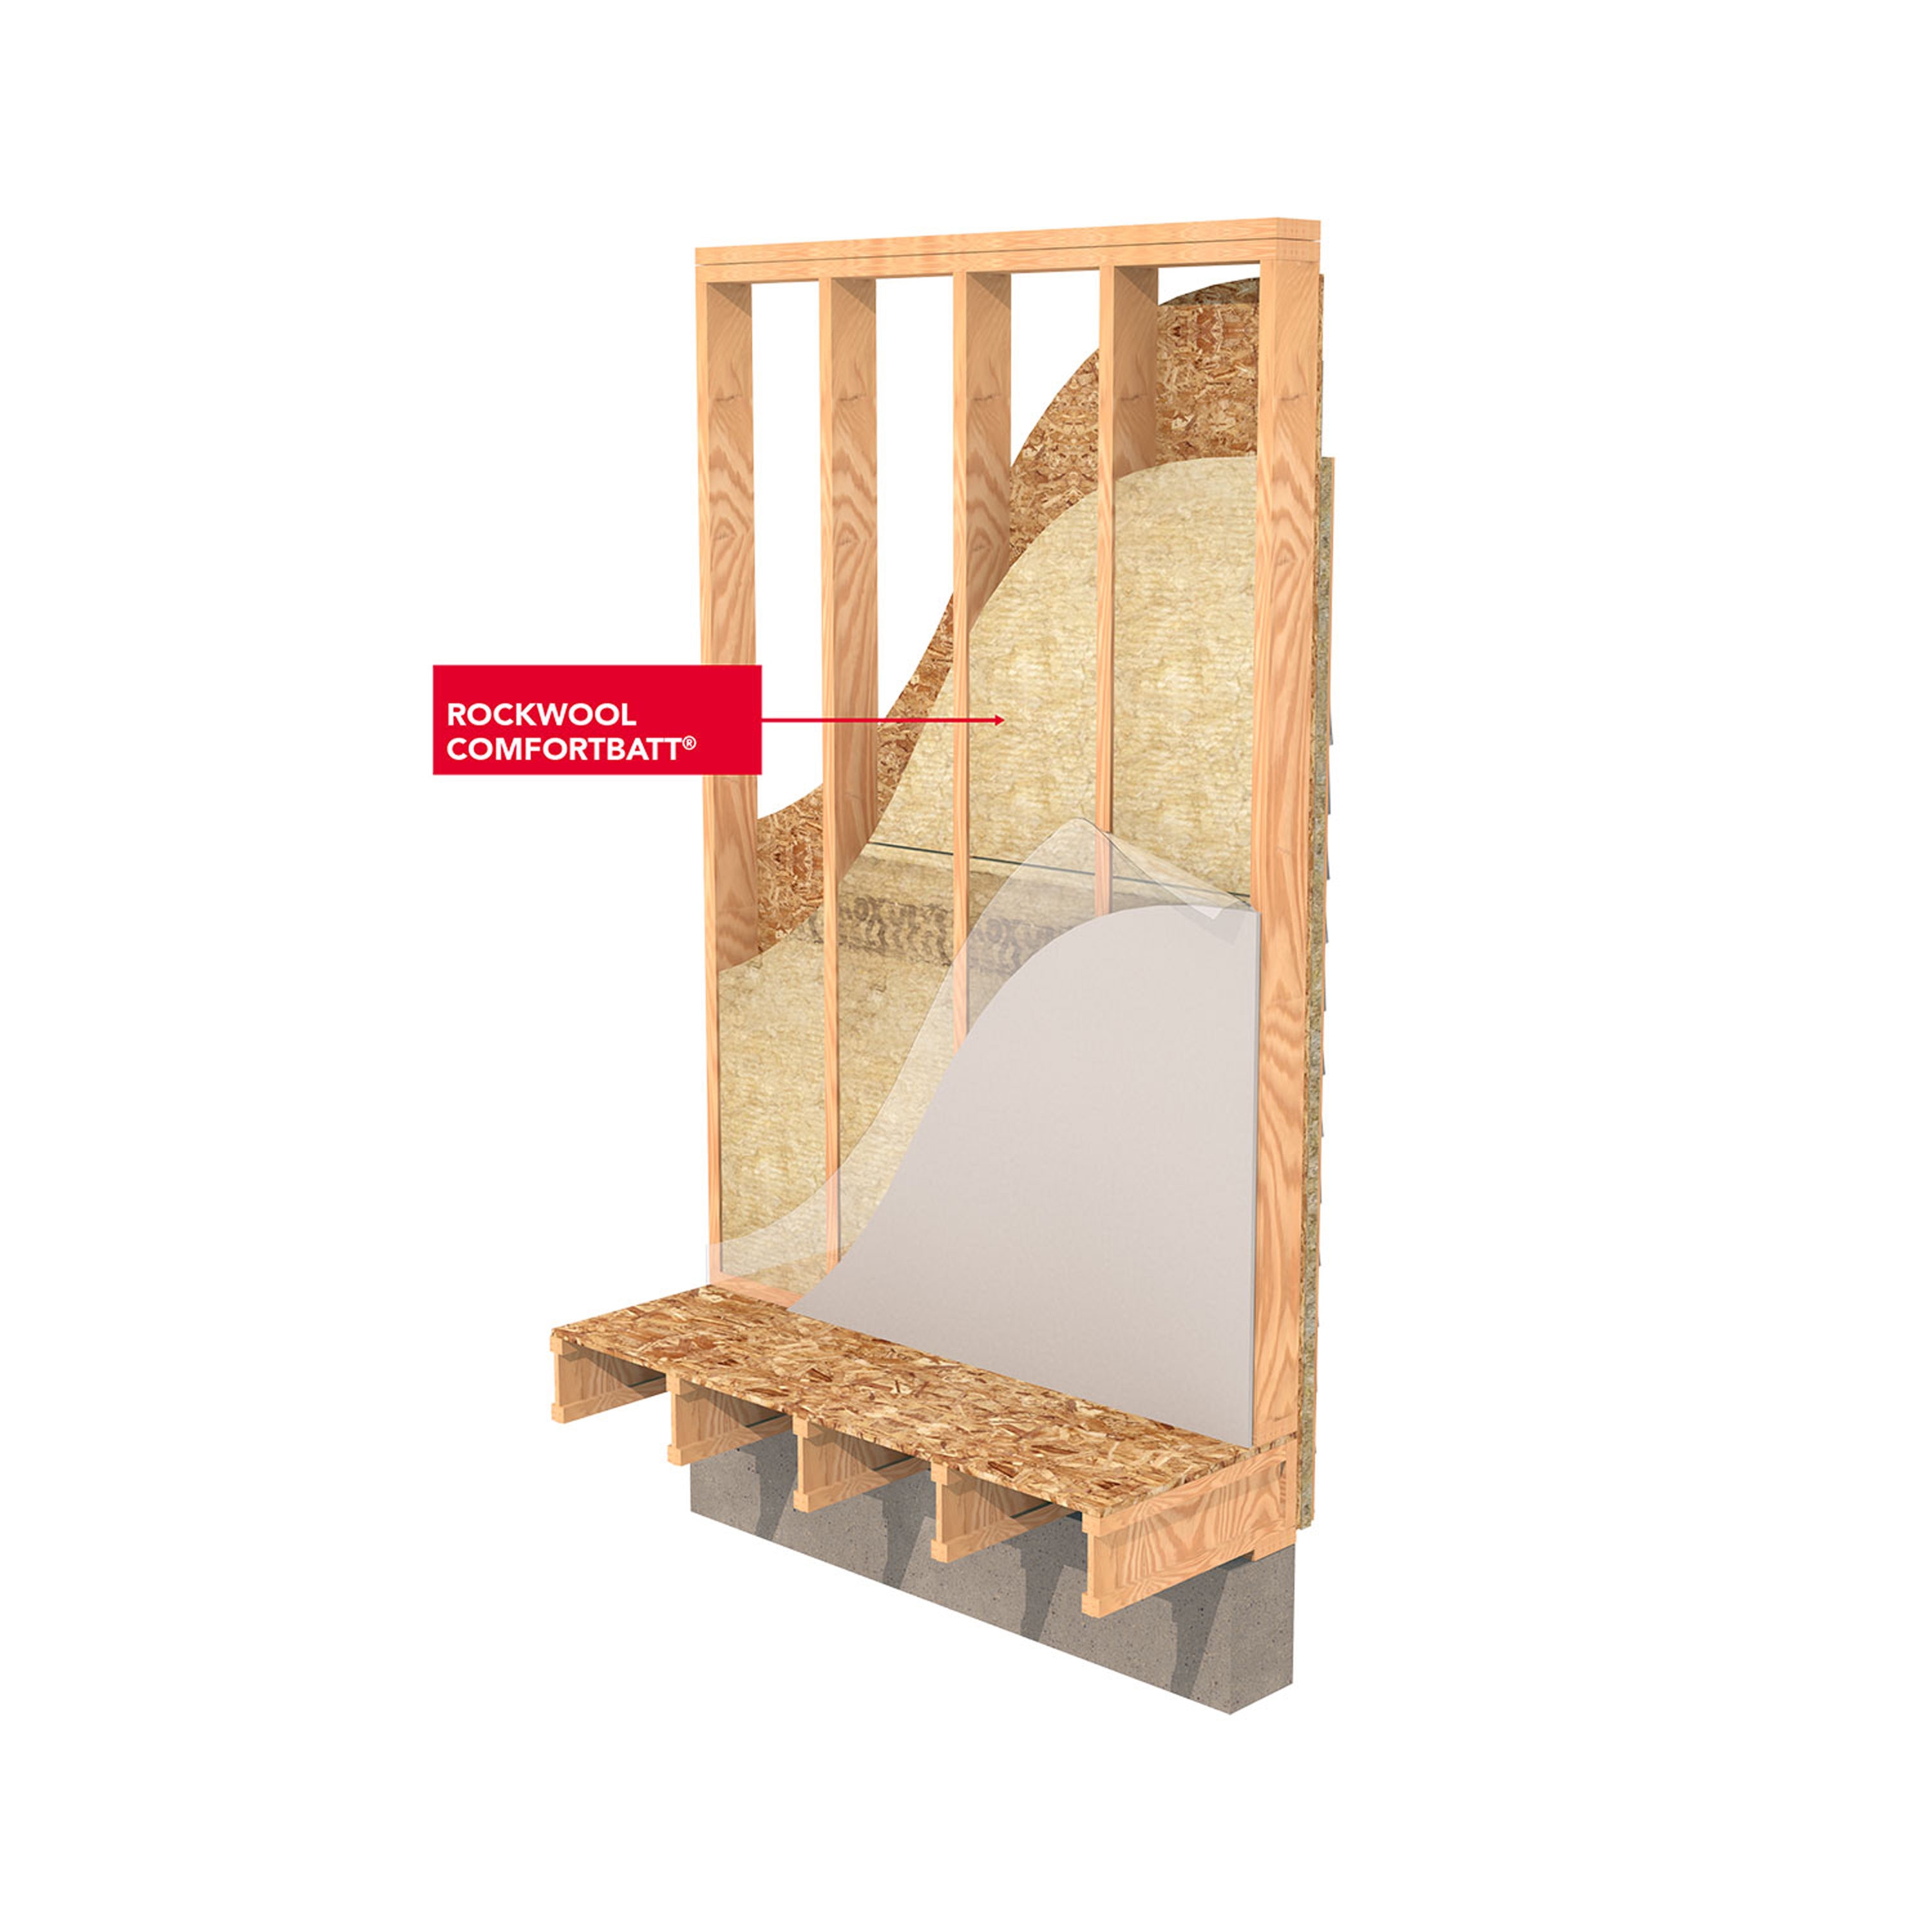 An Intro To Midrise Wood Construction from Rockwool - Available at